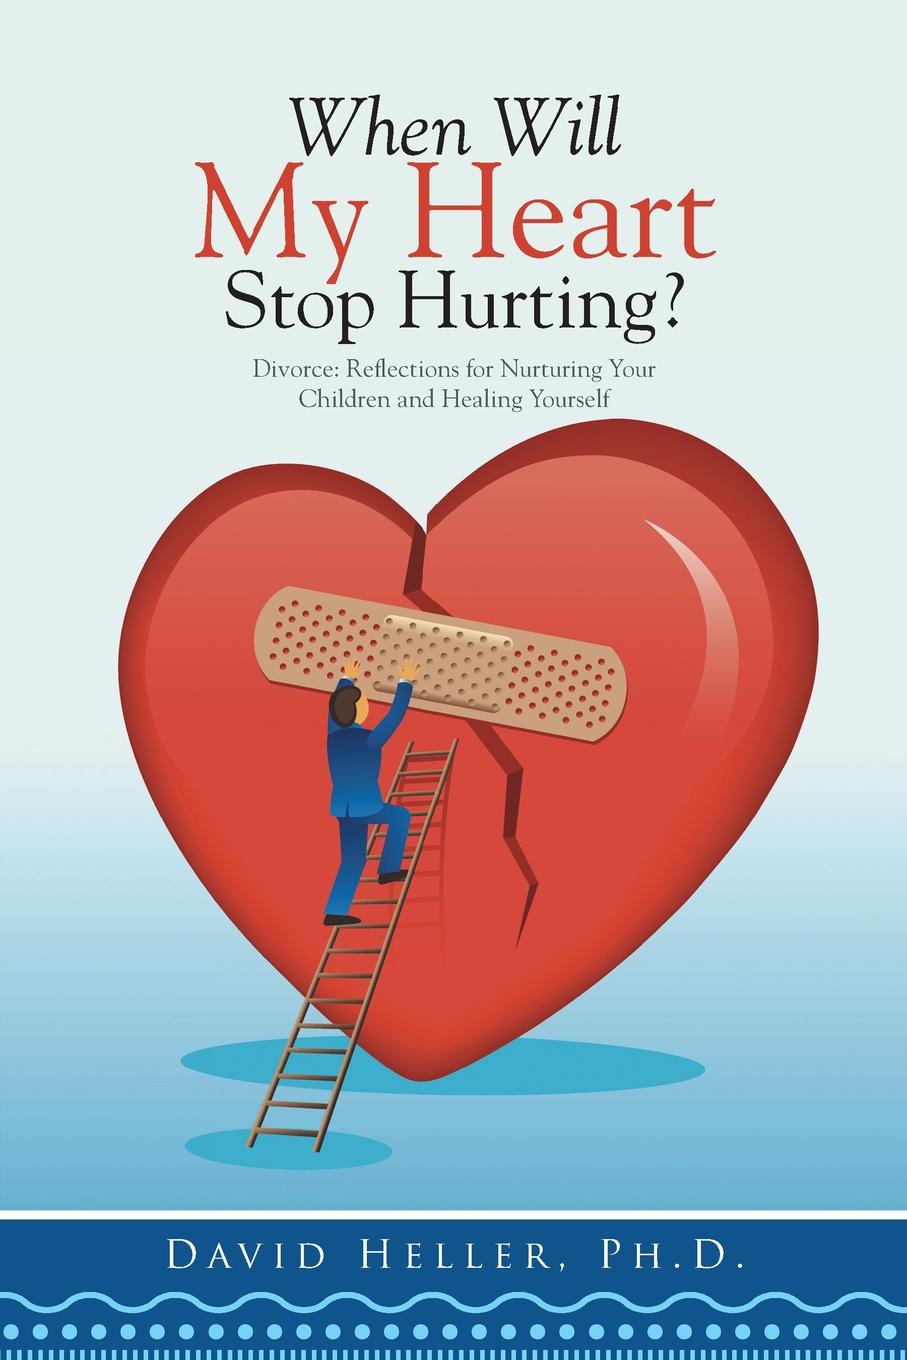 When Will My Heart Stop Hurting?. Divorce: Reflections for Nurturing Your Children and Healing Yourself